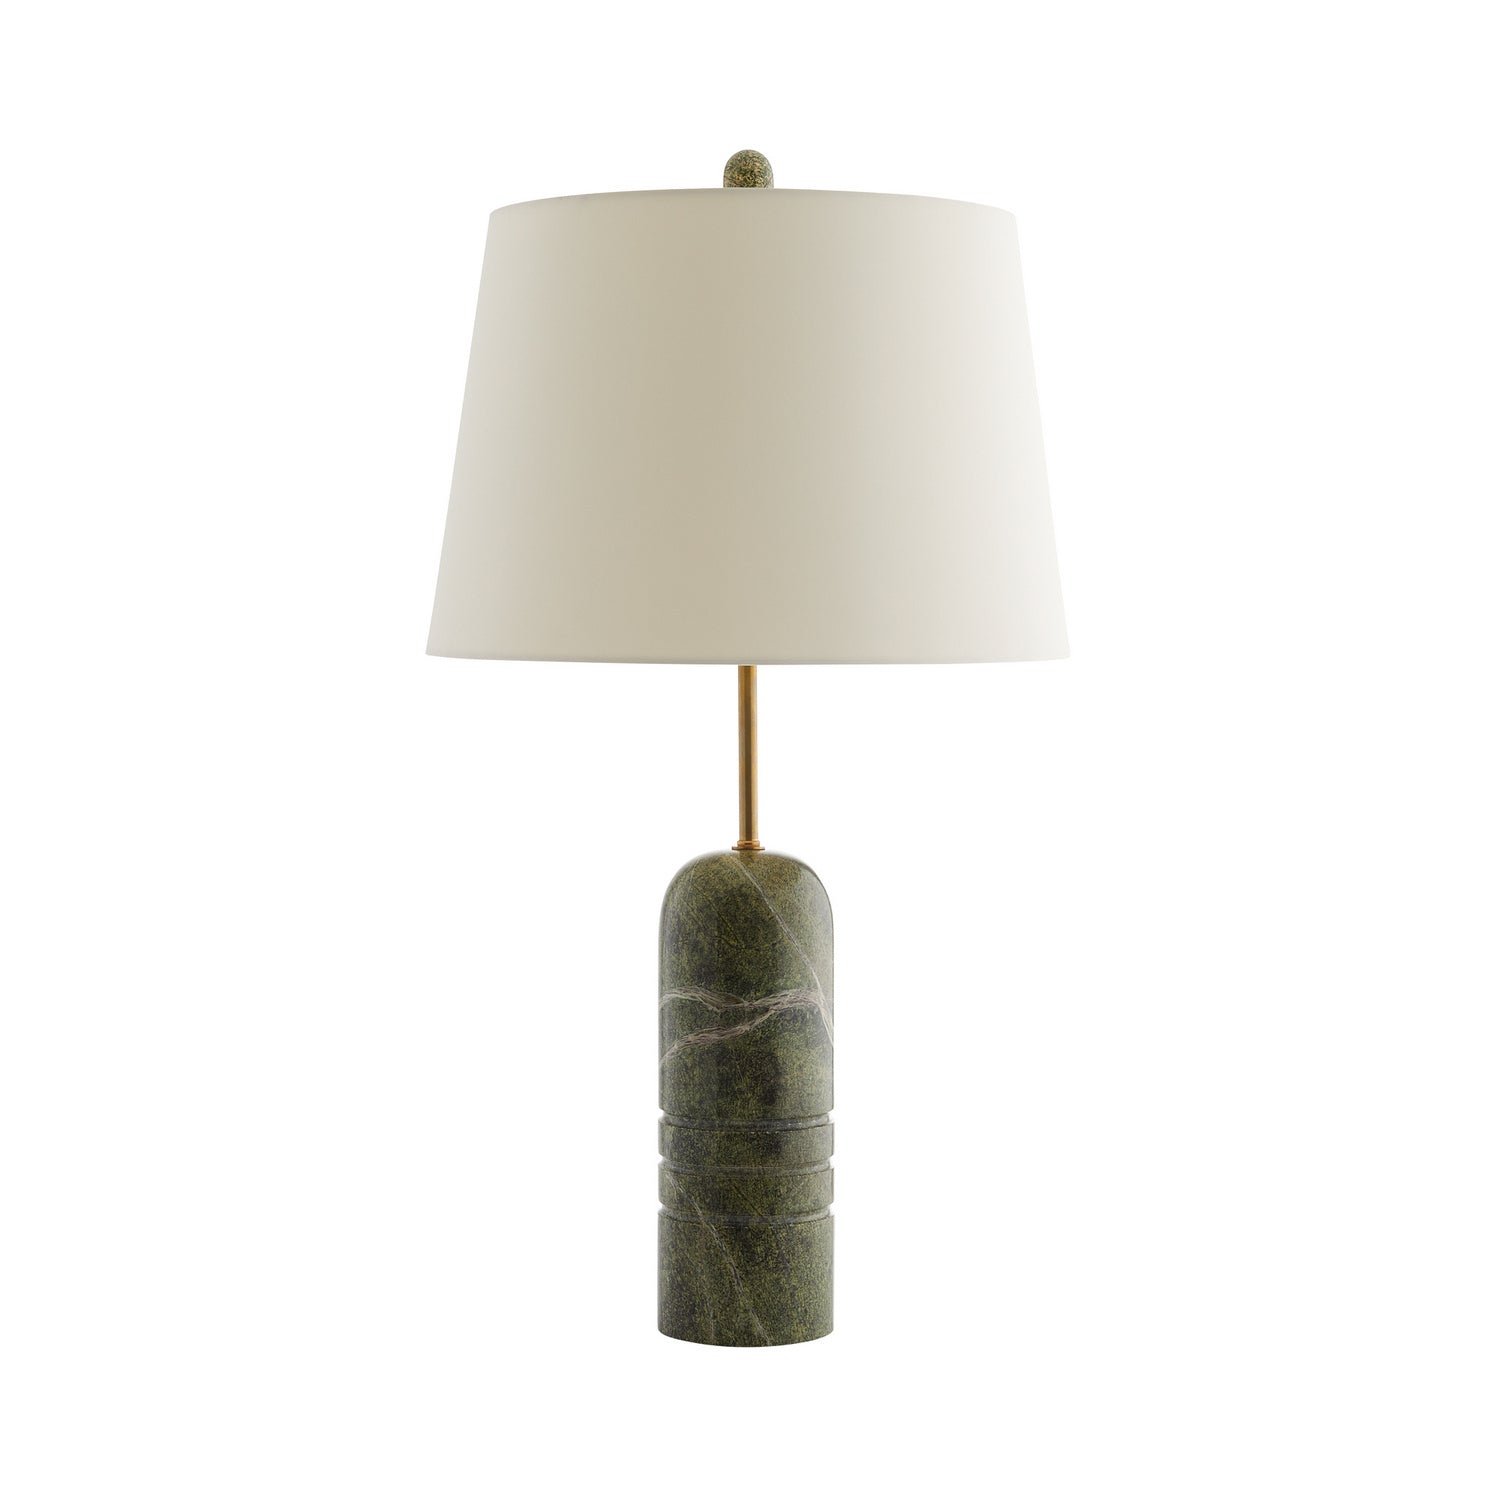 One Light Table Lamp from the Mendoza collection